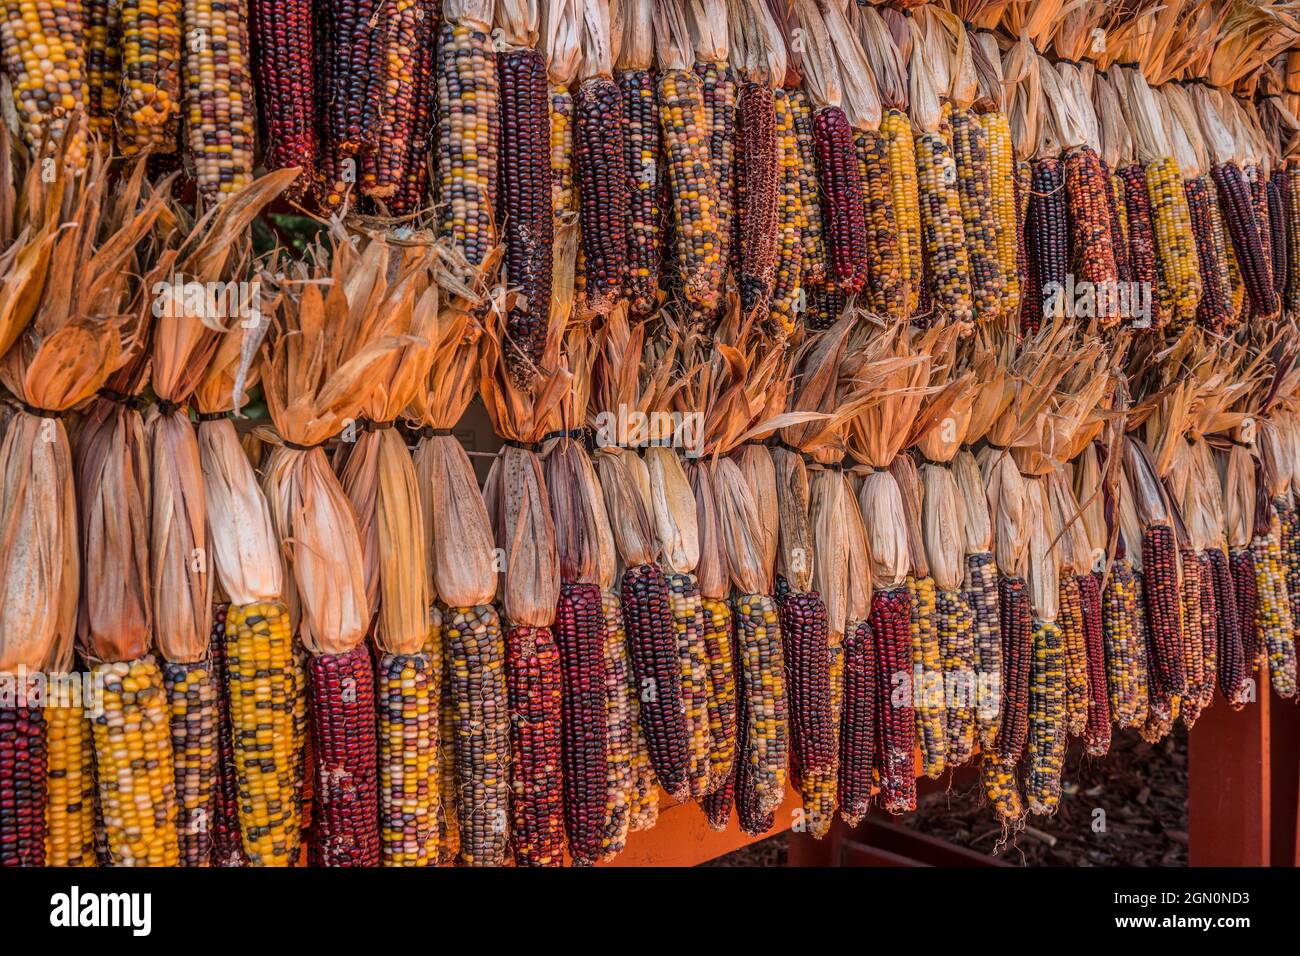 Multicolored corn with the husk used for seasonal decoration in the autumn time hanging in a barn for sale at a farmers market Stock Photo